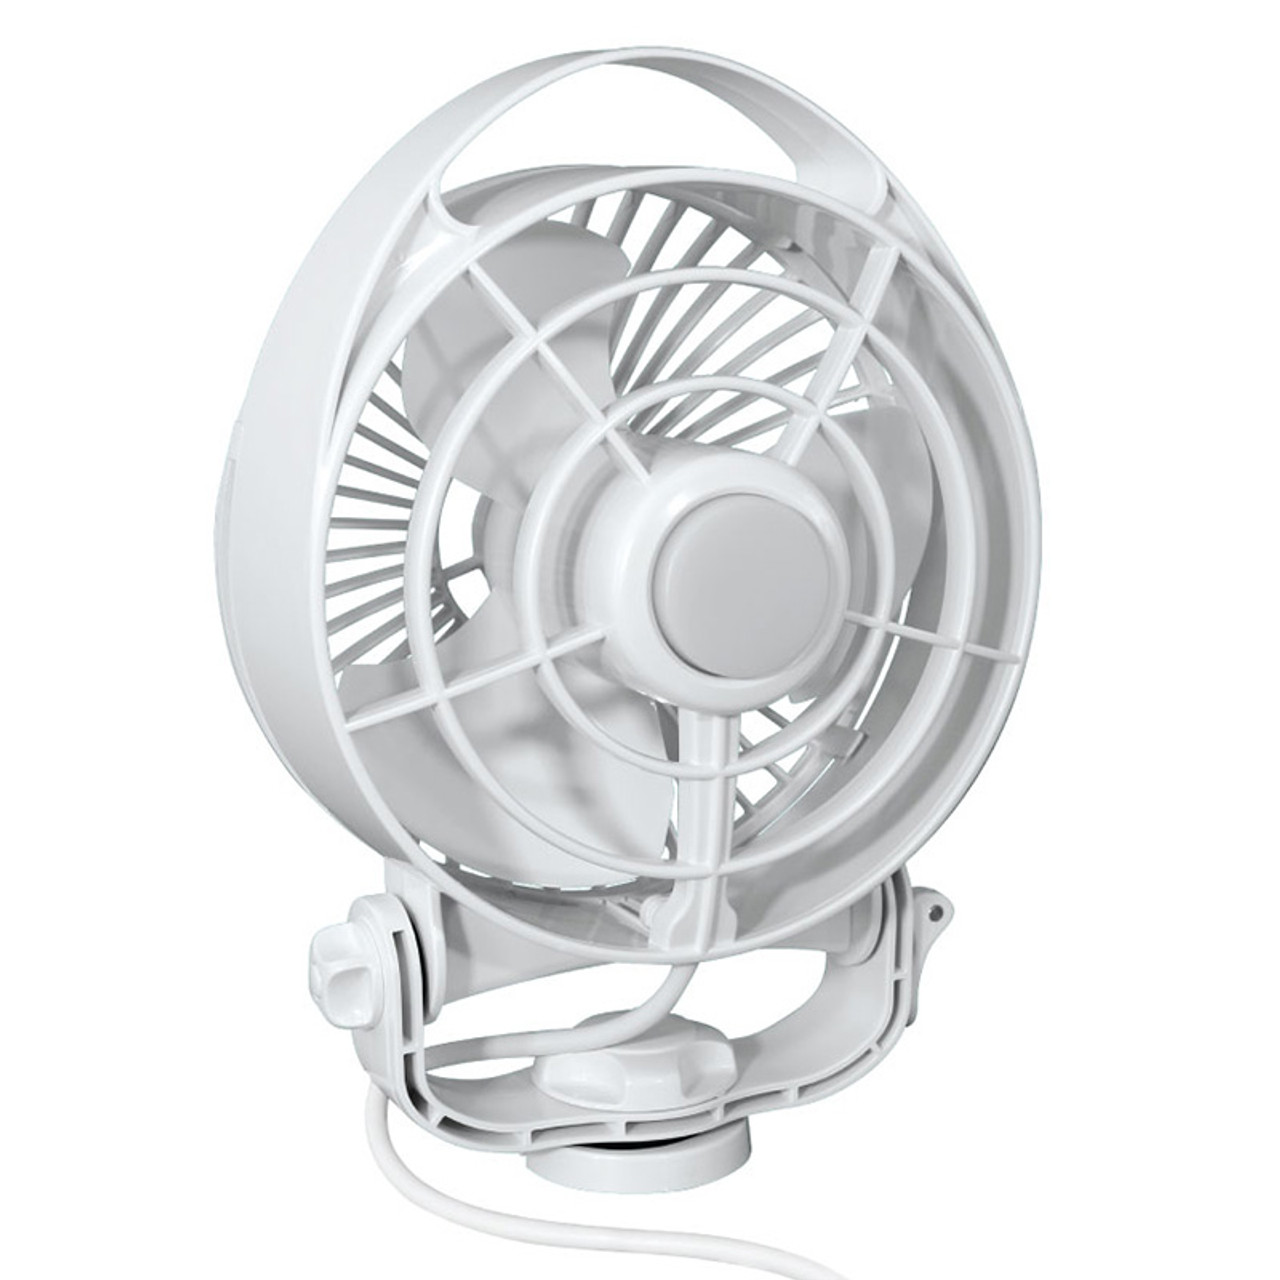 Caframo Maestro 12V White 6" Variable Speed Fan W/ Light And Wired Control. 7482Cawbx | 500-10008